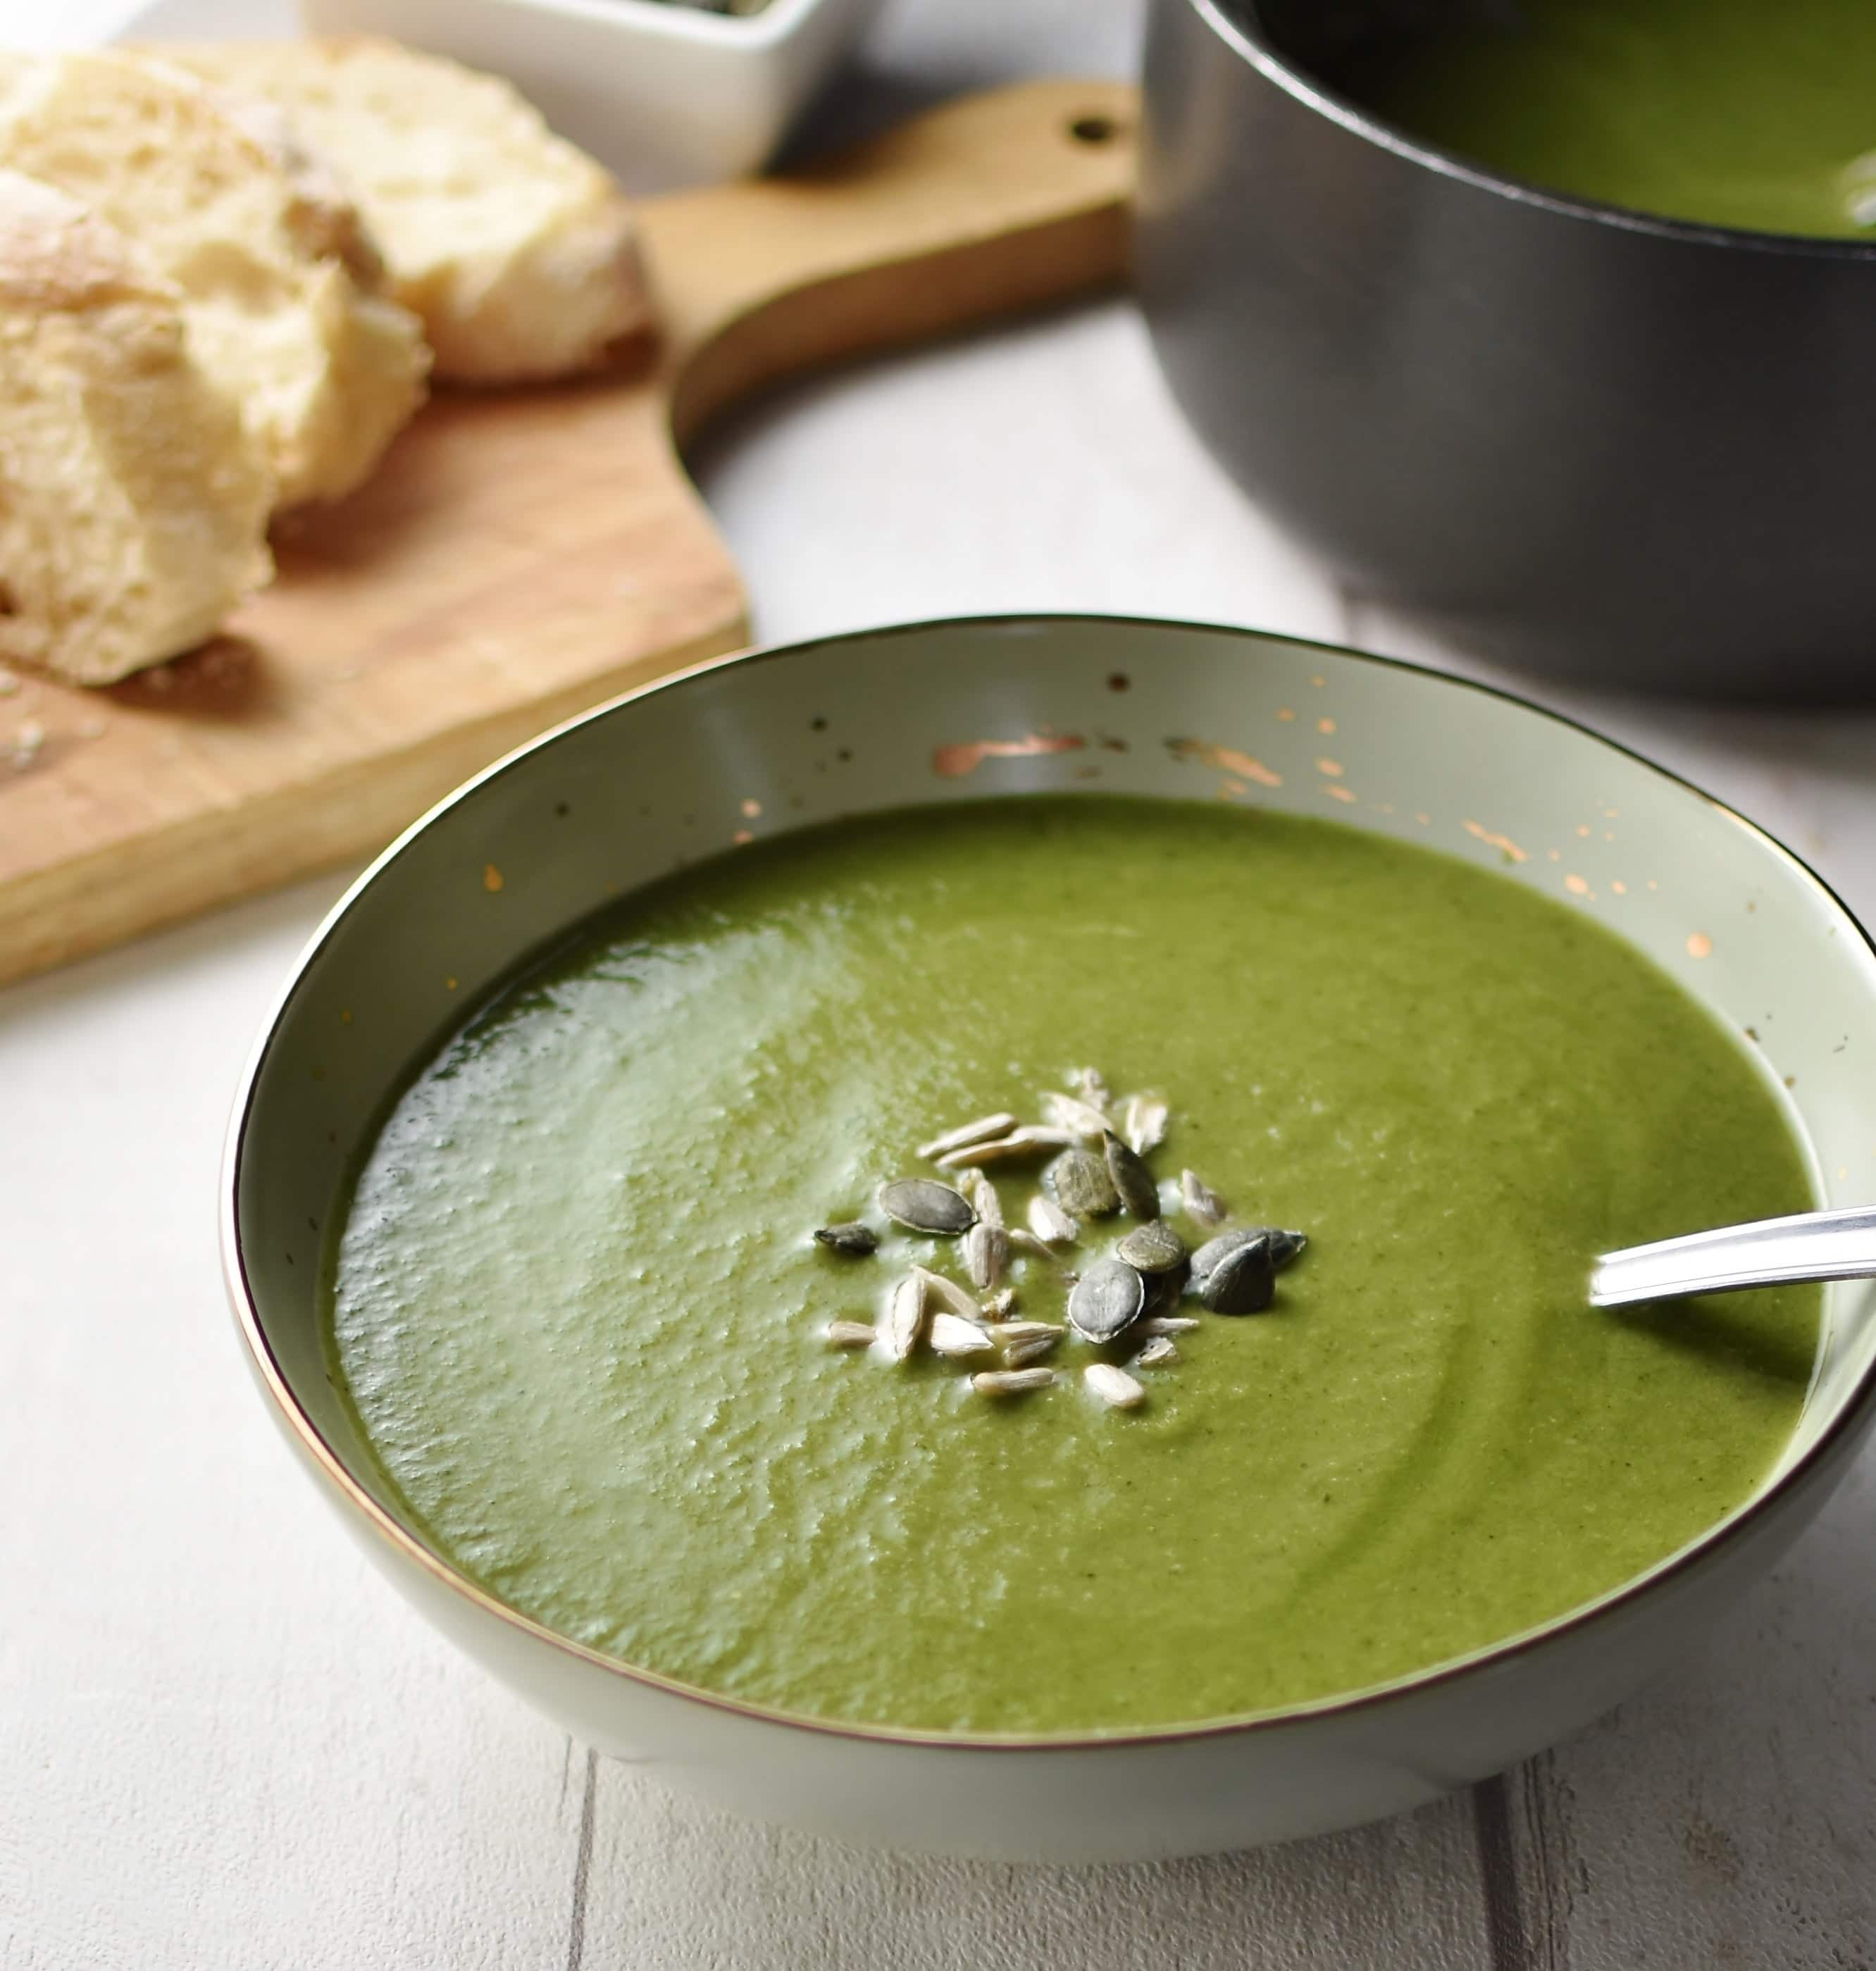 Side view of creamy broccoli spinach soup with seeds and spoon in green bowl, with black saucepan and slices of bread on top of cutting board in background.